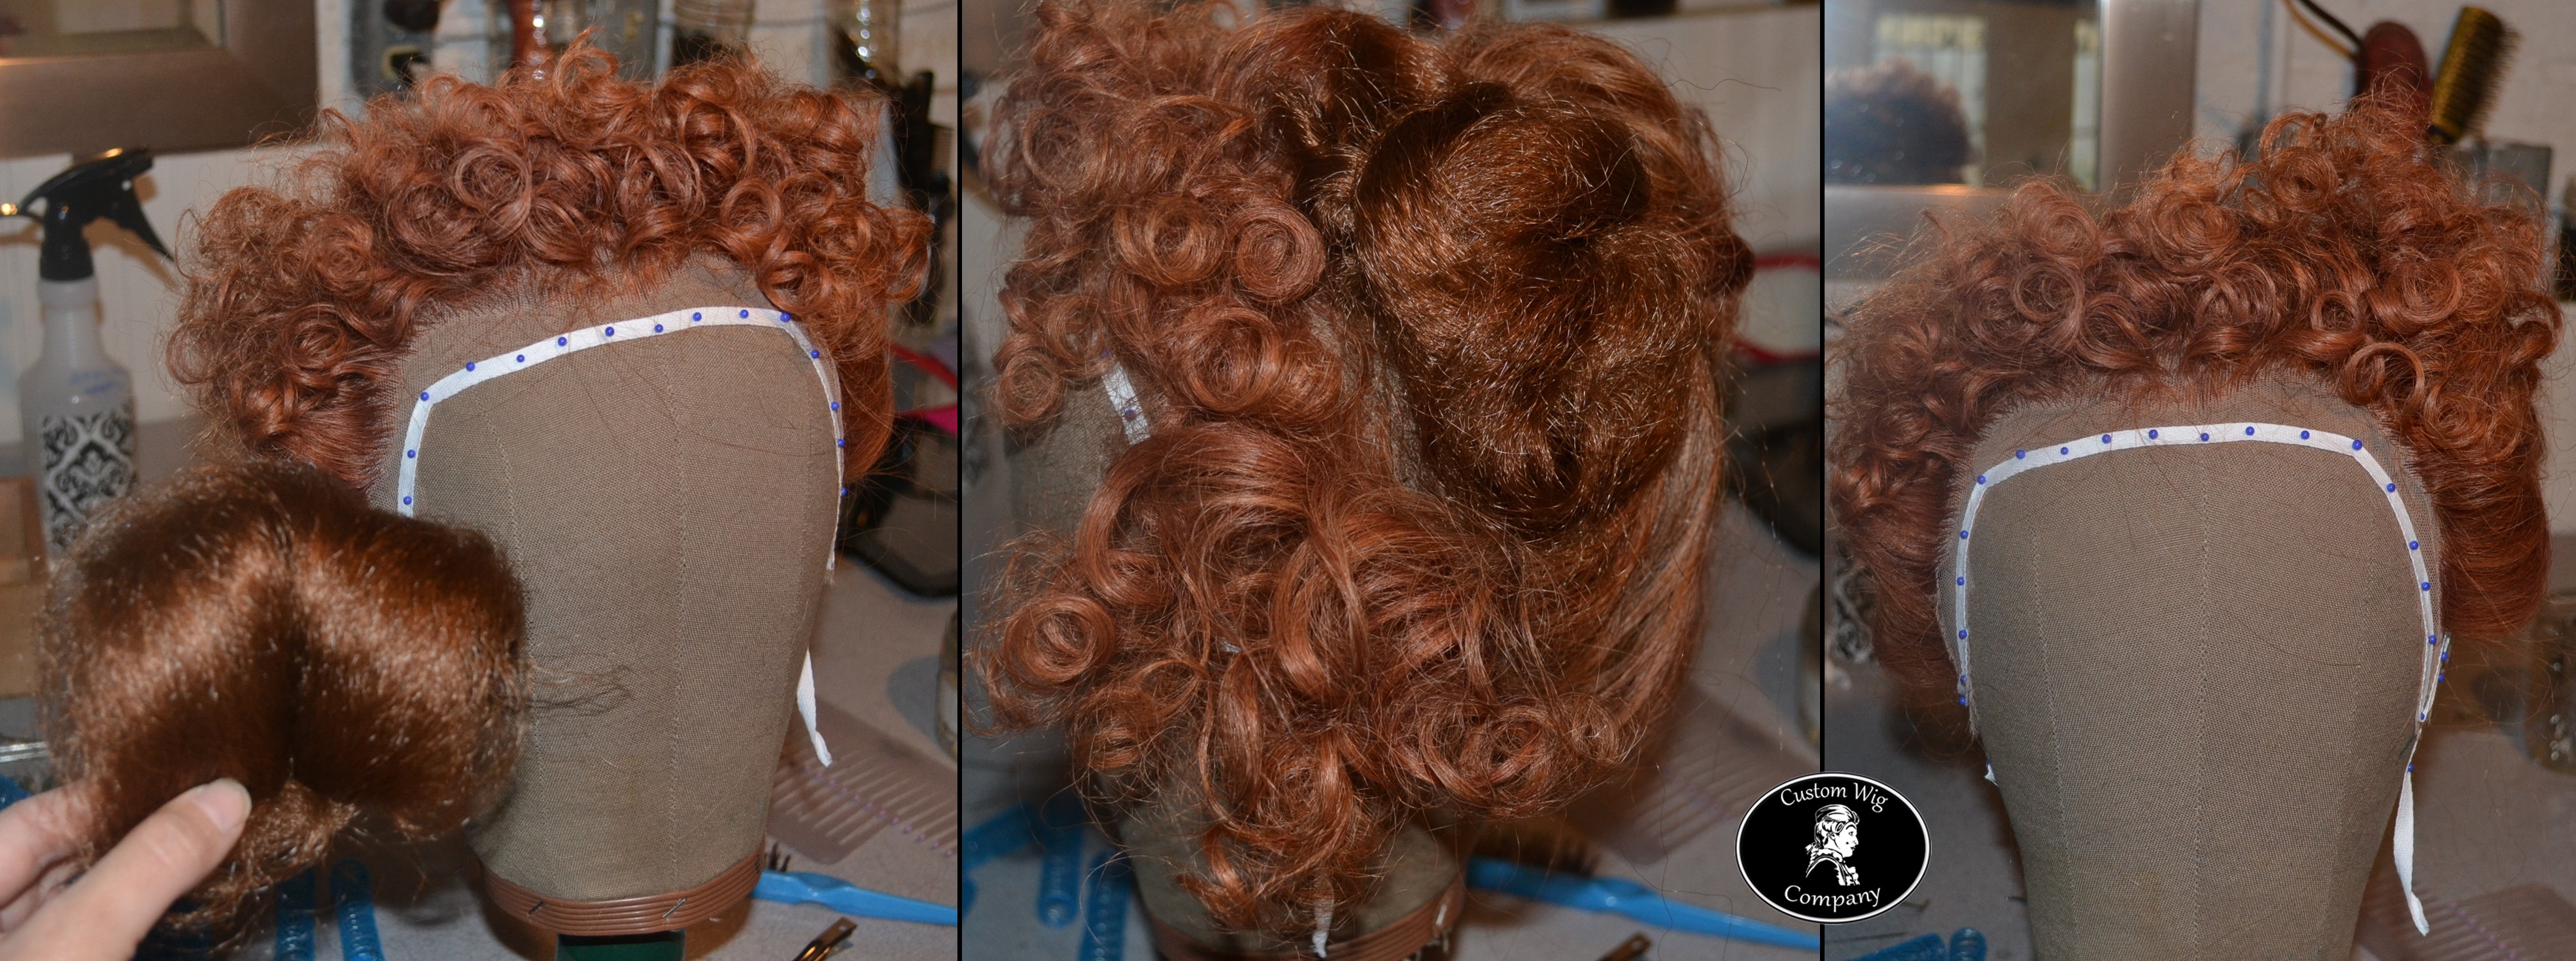 Pictorial Guide to Rollers - Elizabethan Hair Style - Custom Wig Company